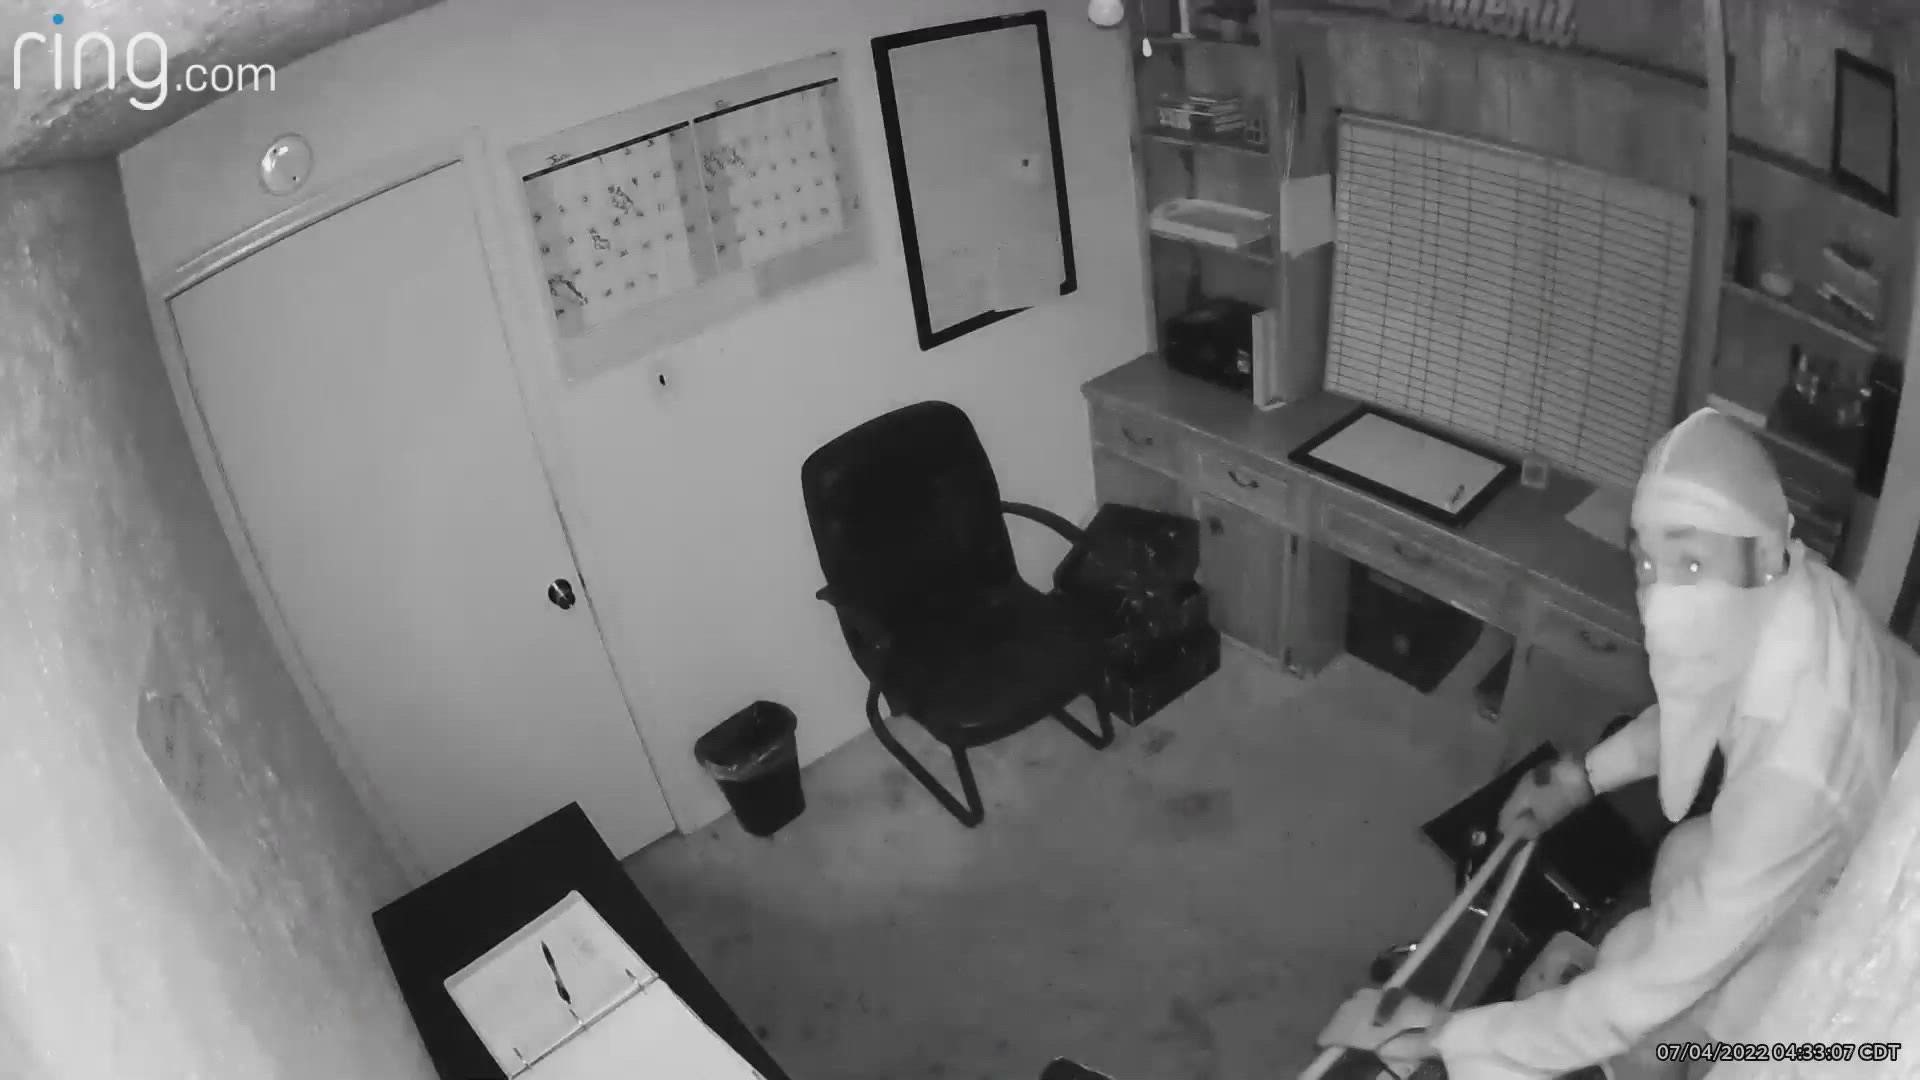 The thief was caught on camera breaking into the Saving Grace Recovery home and stealing donations from a safe.